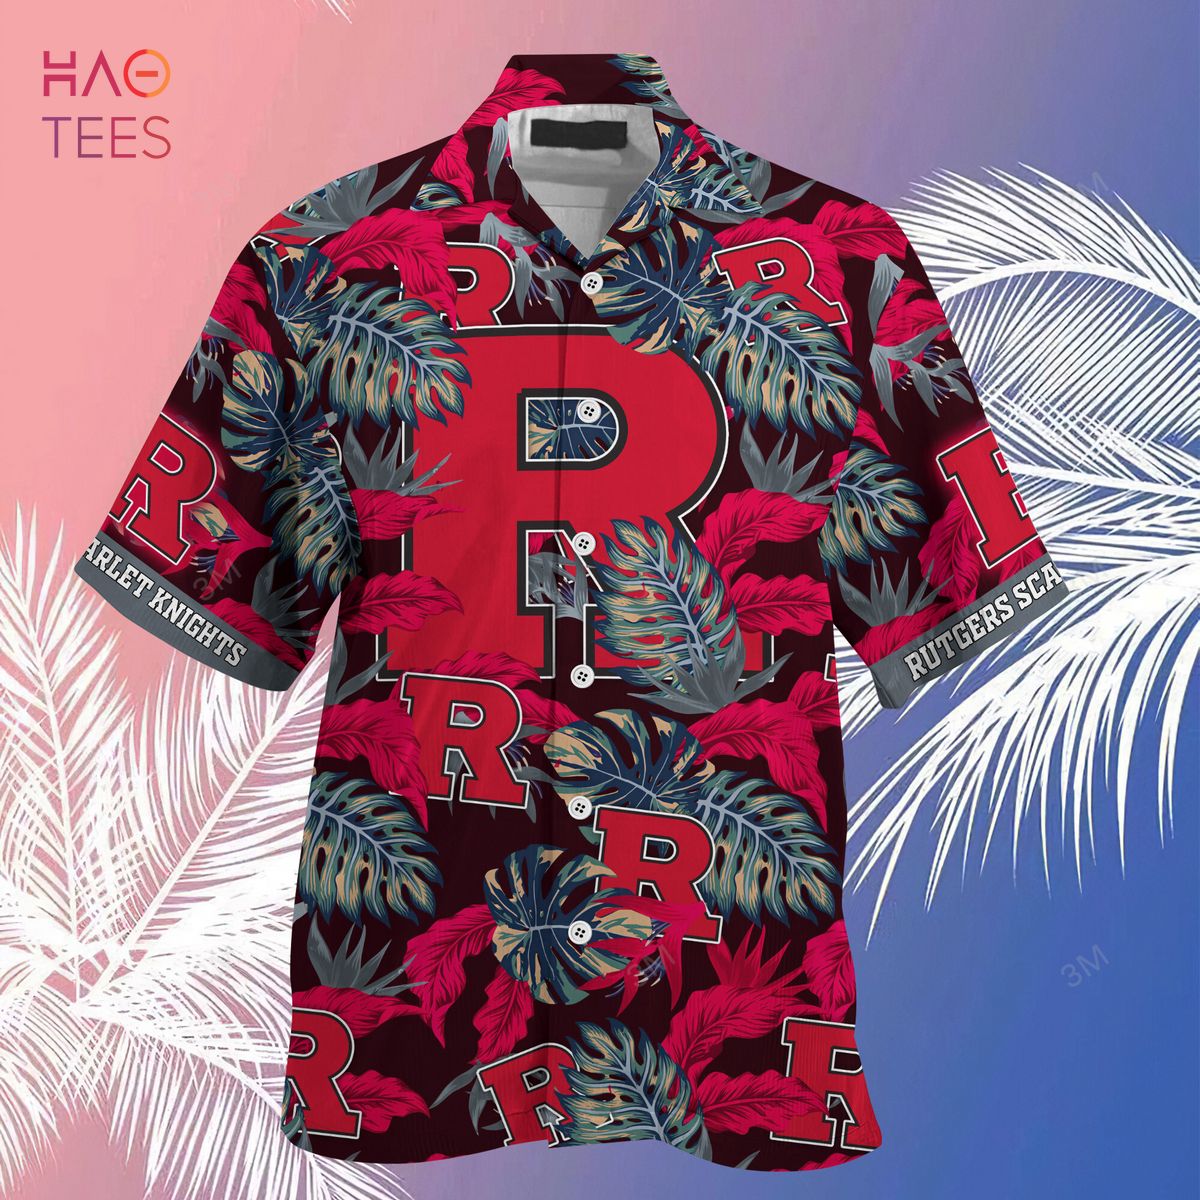 [LIMITED] Rutgers Scarlet Knights Summer Hawaiian Shirt And Shorts, Stress Blessed Obsessed For Fans